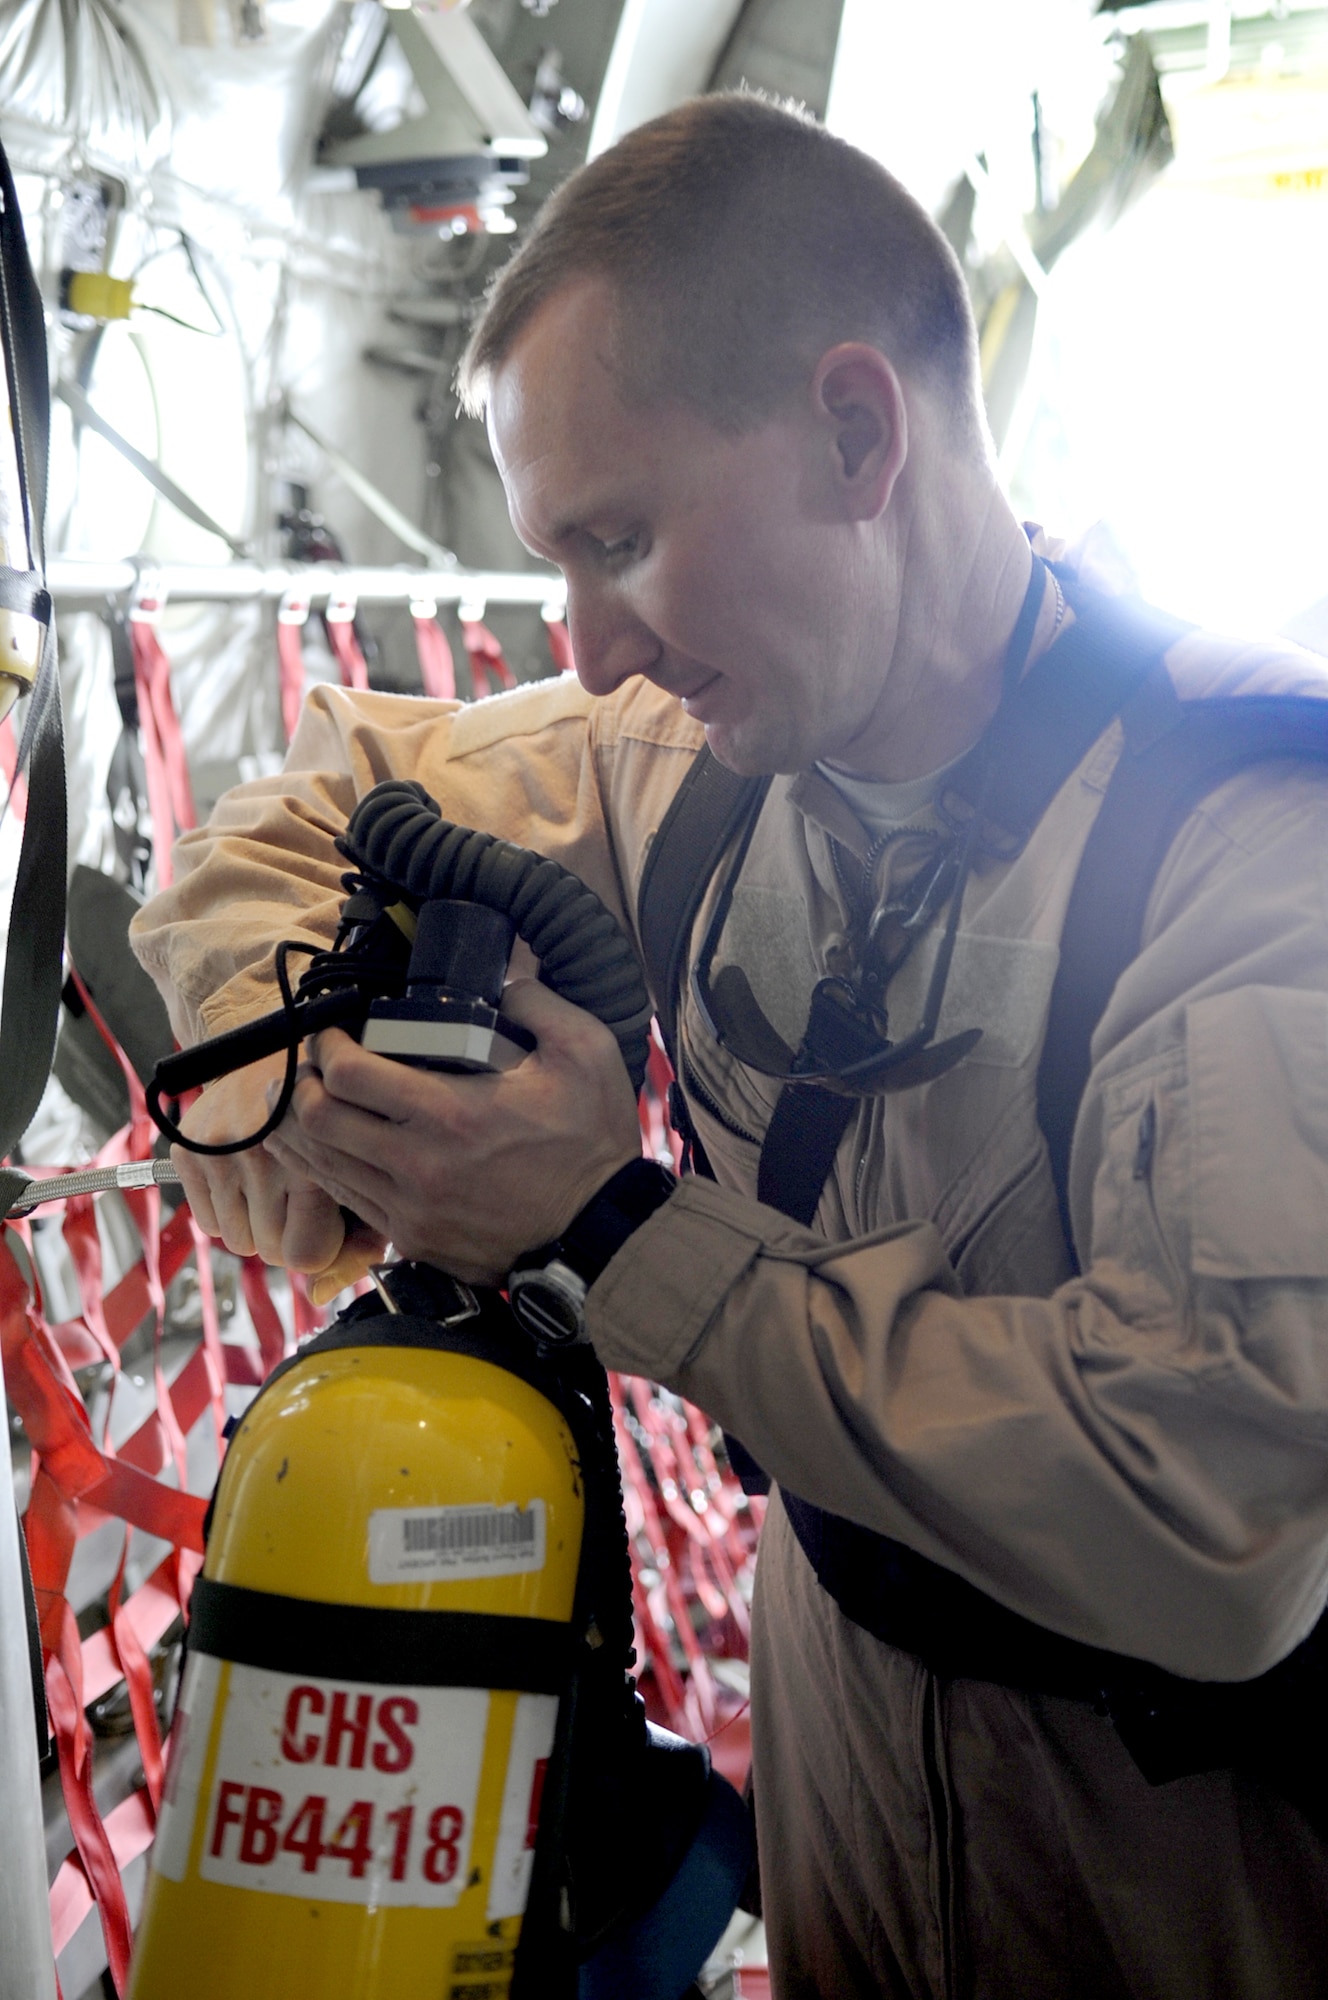 Maj. David Bailey refills an emergency oxygen tank prior to take off on an aeromedical evacuation mission June 9 at Kandahar Airfield, Afghanistan. Major Bailey is assigned to the 451st Expeditionary Aeromedical Evacuation Squadron. (U.S. Air Force photo/Senior Airman Nancy Hooks)